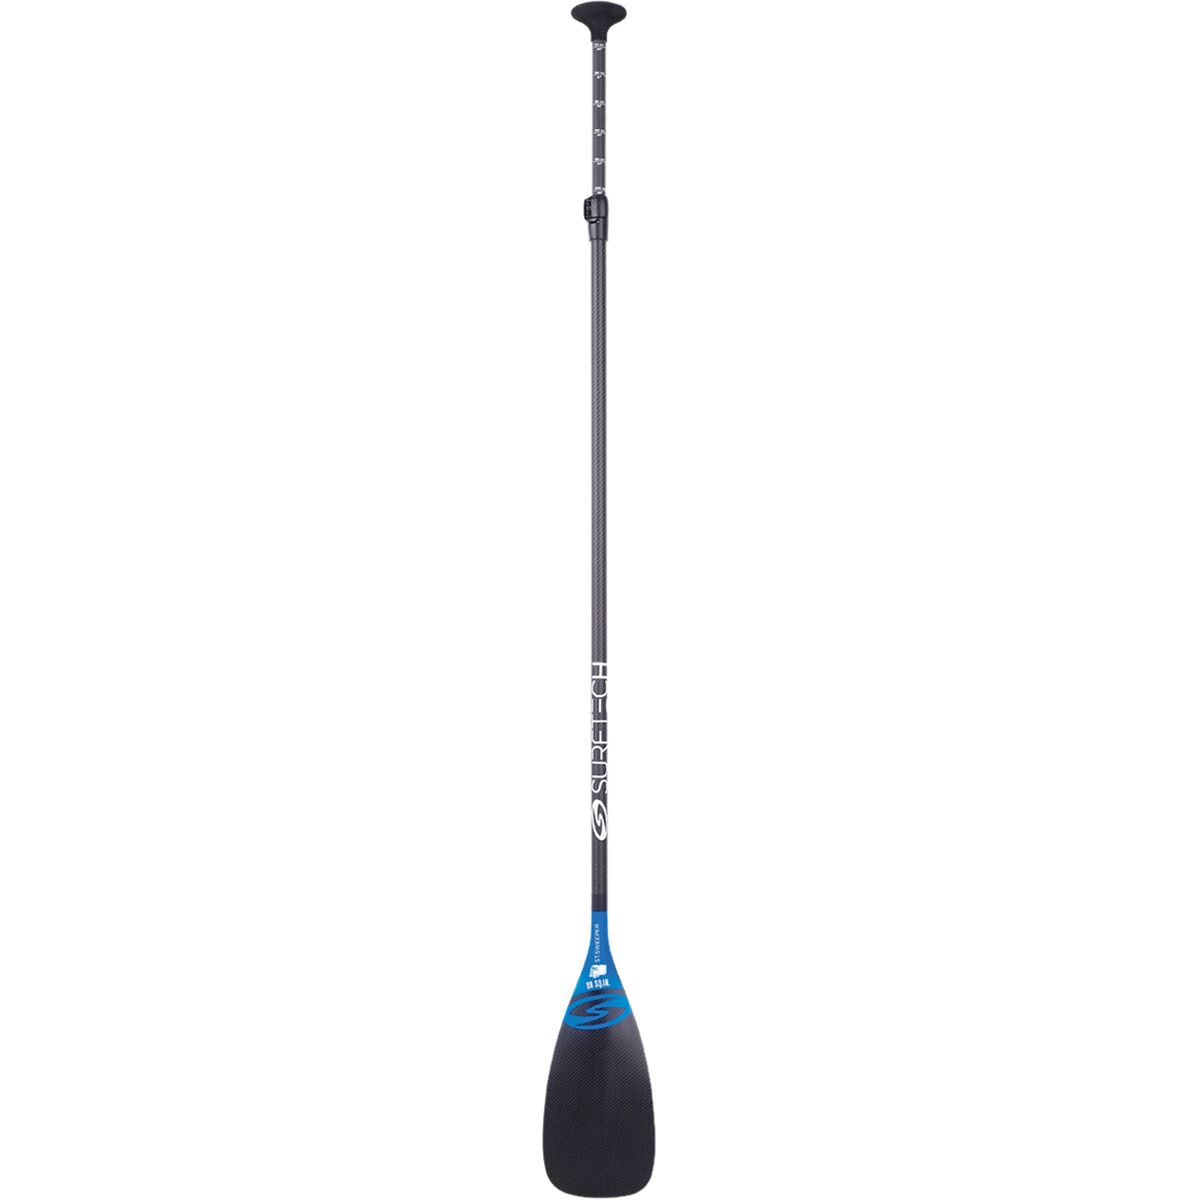 Surftech Street Sweeper 88 2-Piece Carbon Adjustable Paddle